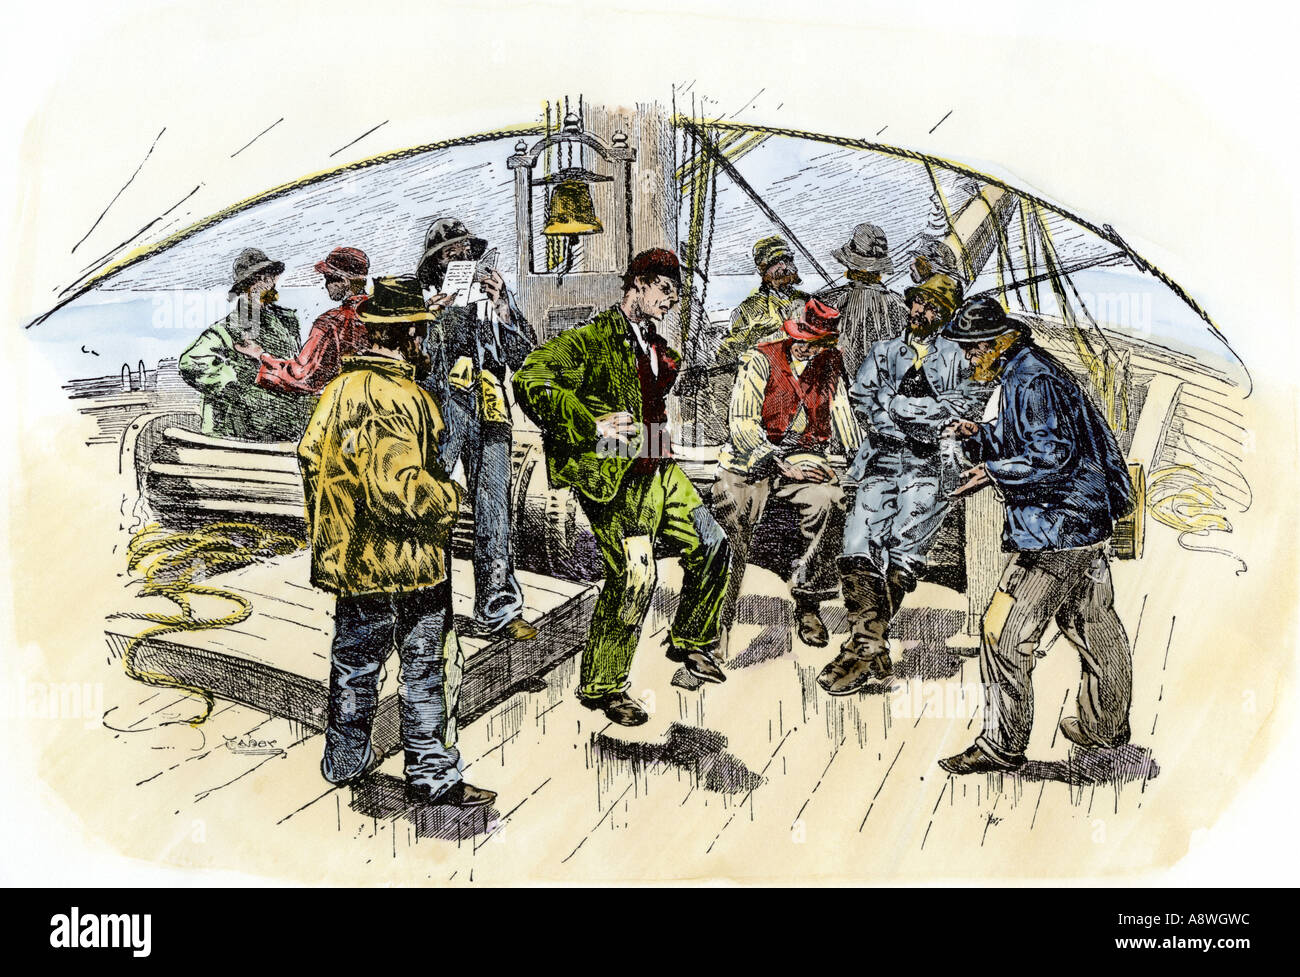 Sailors gamming a time of talking and entertaining each other on a whaling ship 1800s. Hand-colored woodcut Stock Photo